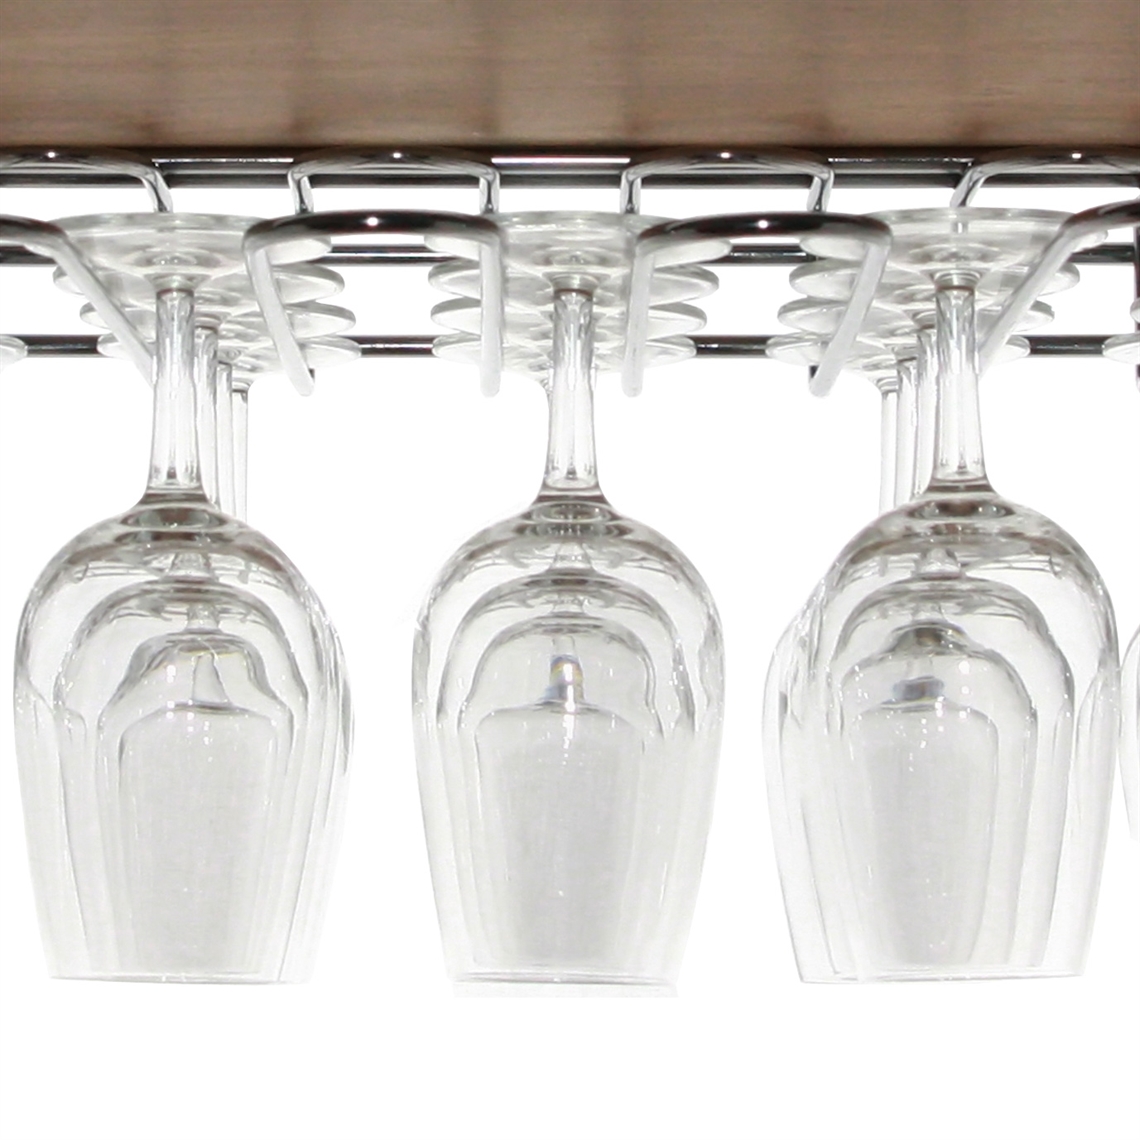 View more barware from our Wine Glass Hanging Racks range